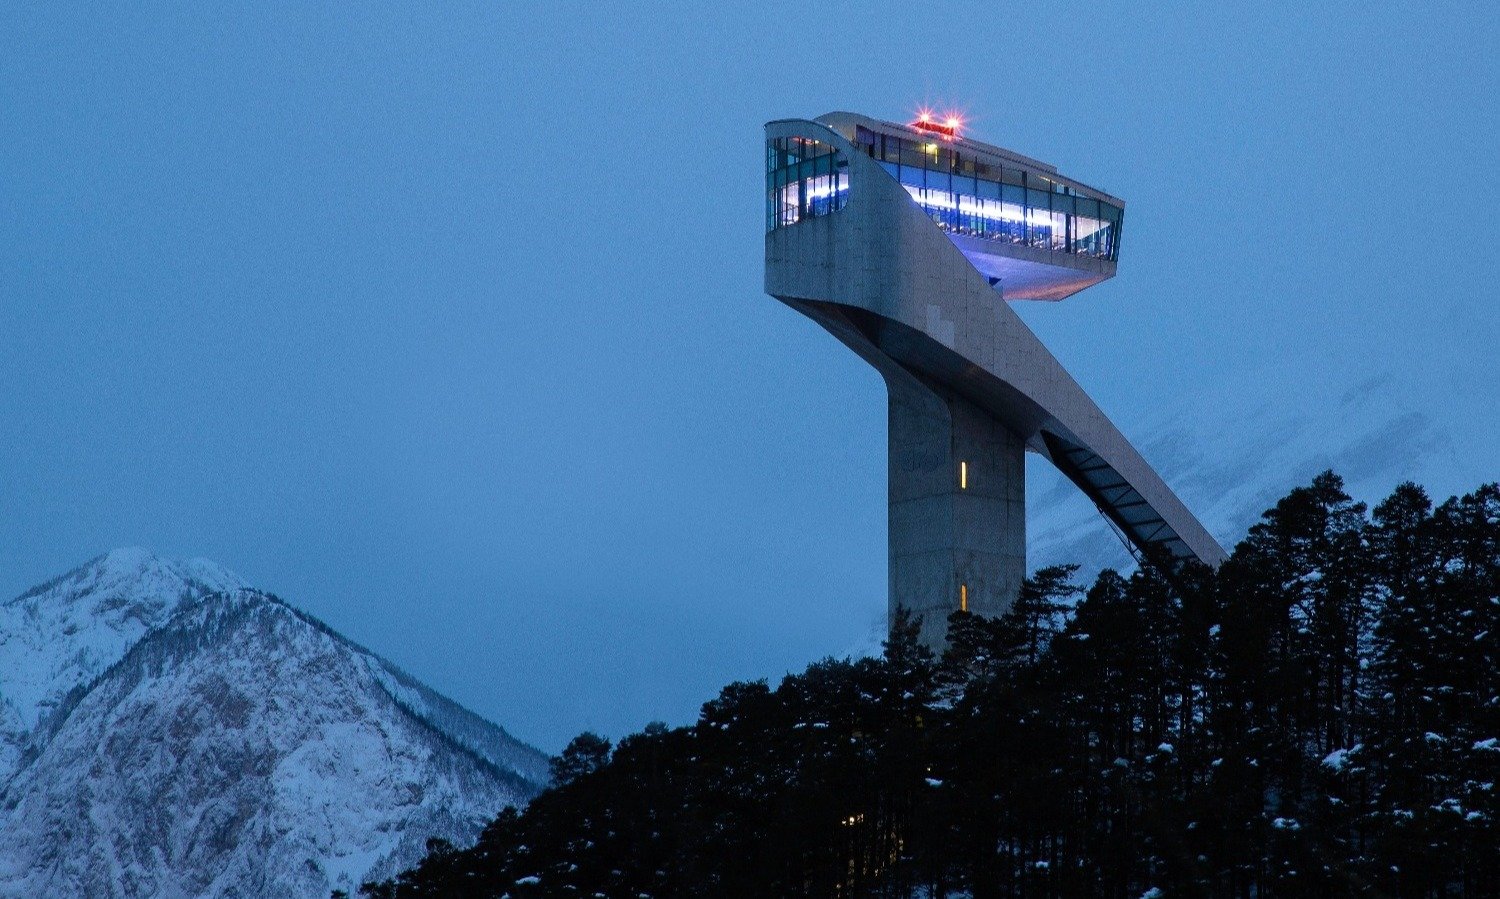 Air traffic control tower in the mountains emitting red light